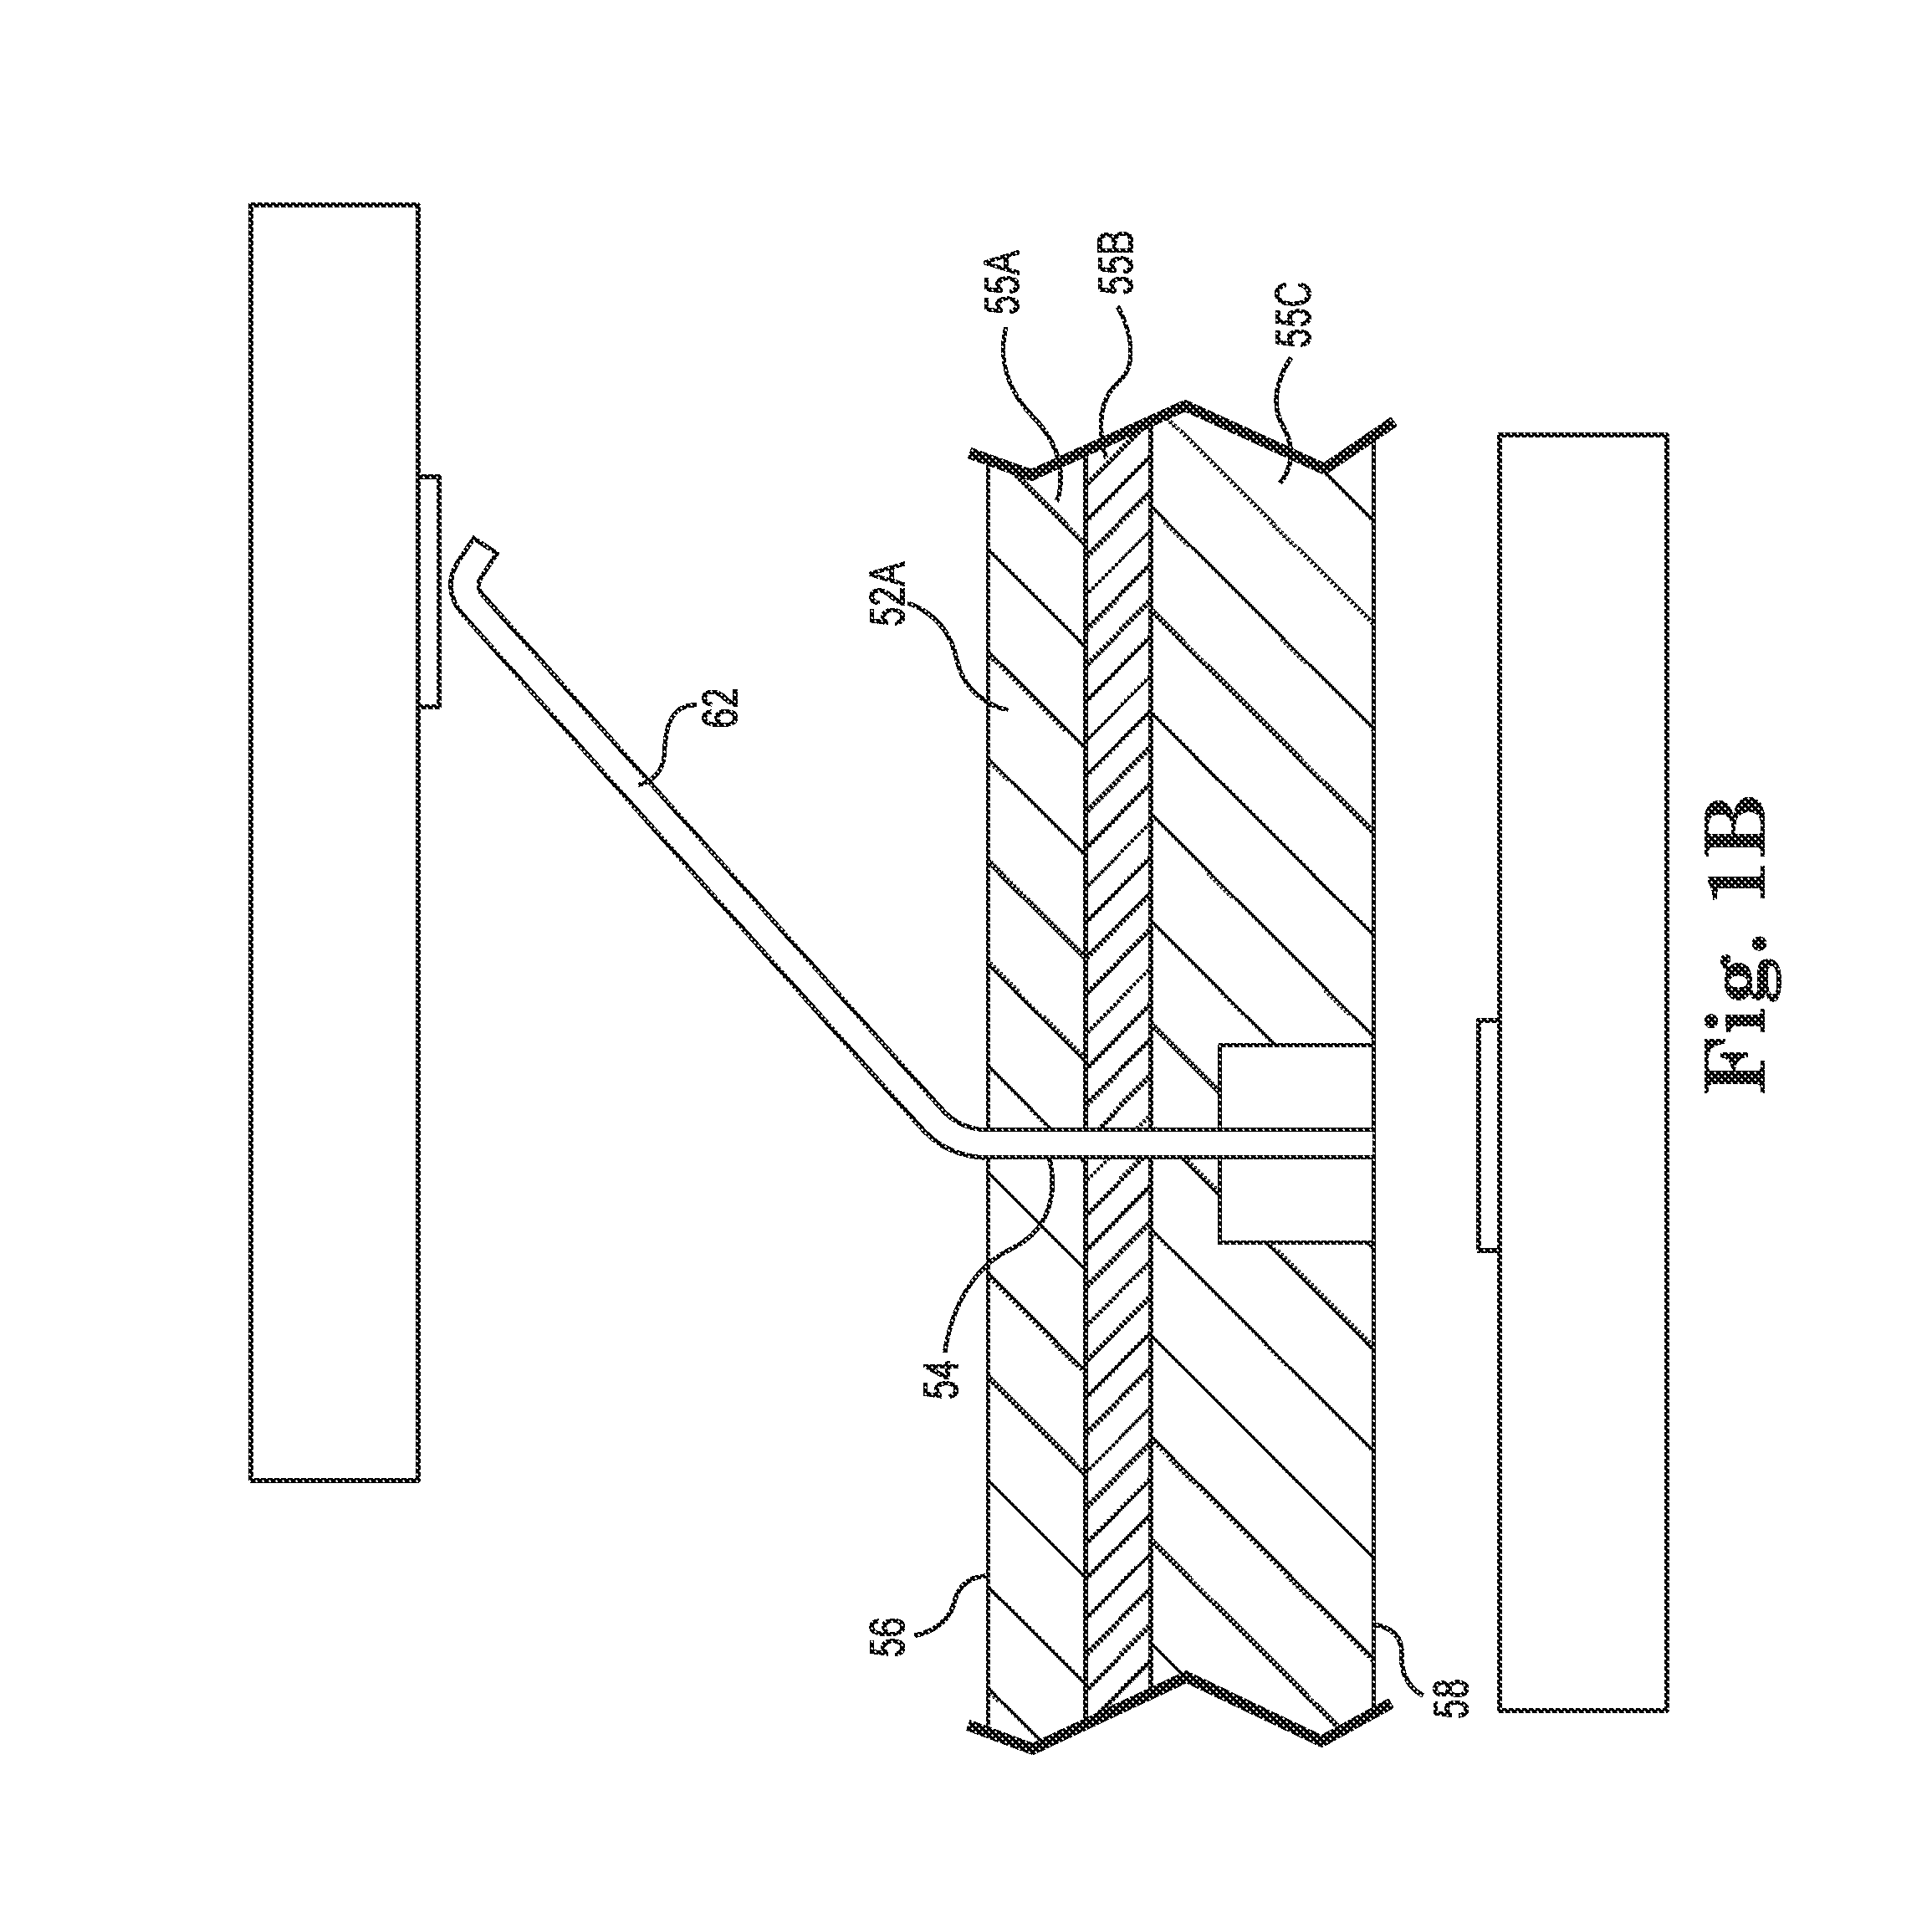 High performance surface mount electrical interconnect